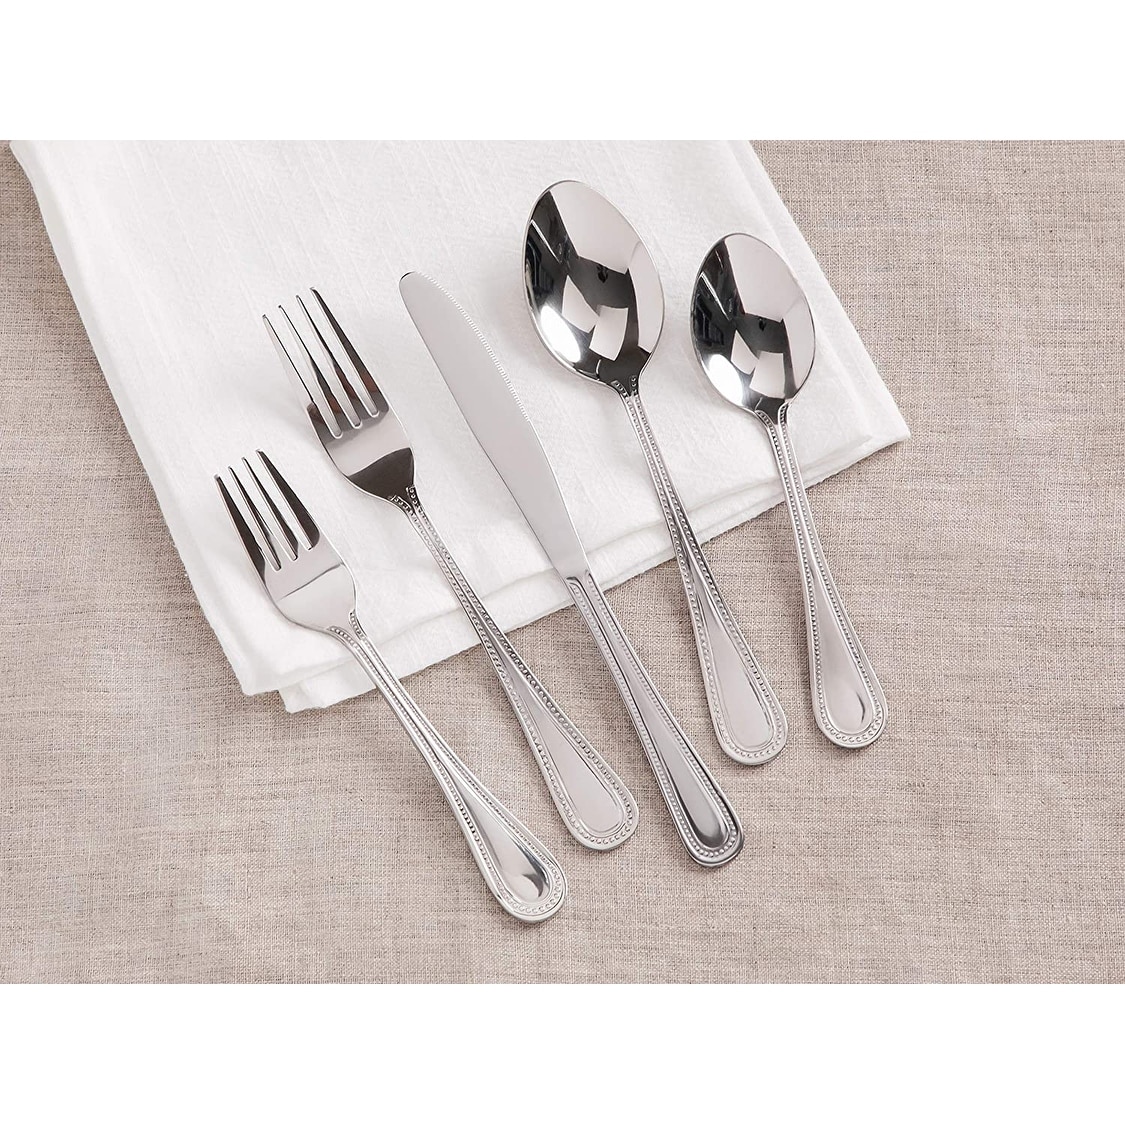 https://ak1.ostkcdn.com/images/products/is/images/direct/fc94865b56dc38ee1c2926fa9e4d6413809ab5b2/20-Piece-Silverware-Set-Flatware-Stainless-Steel-Utensils-Kitchen-Apartment-Essentials-Tableware-Home-Cutlery-Set.jpg